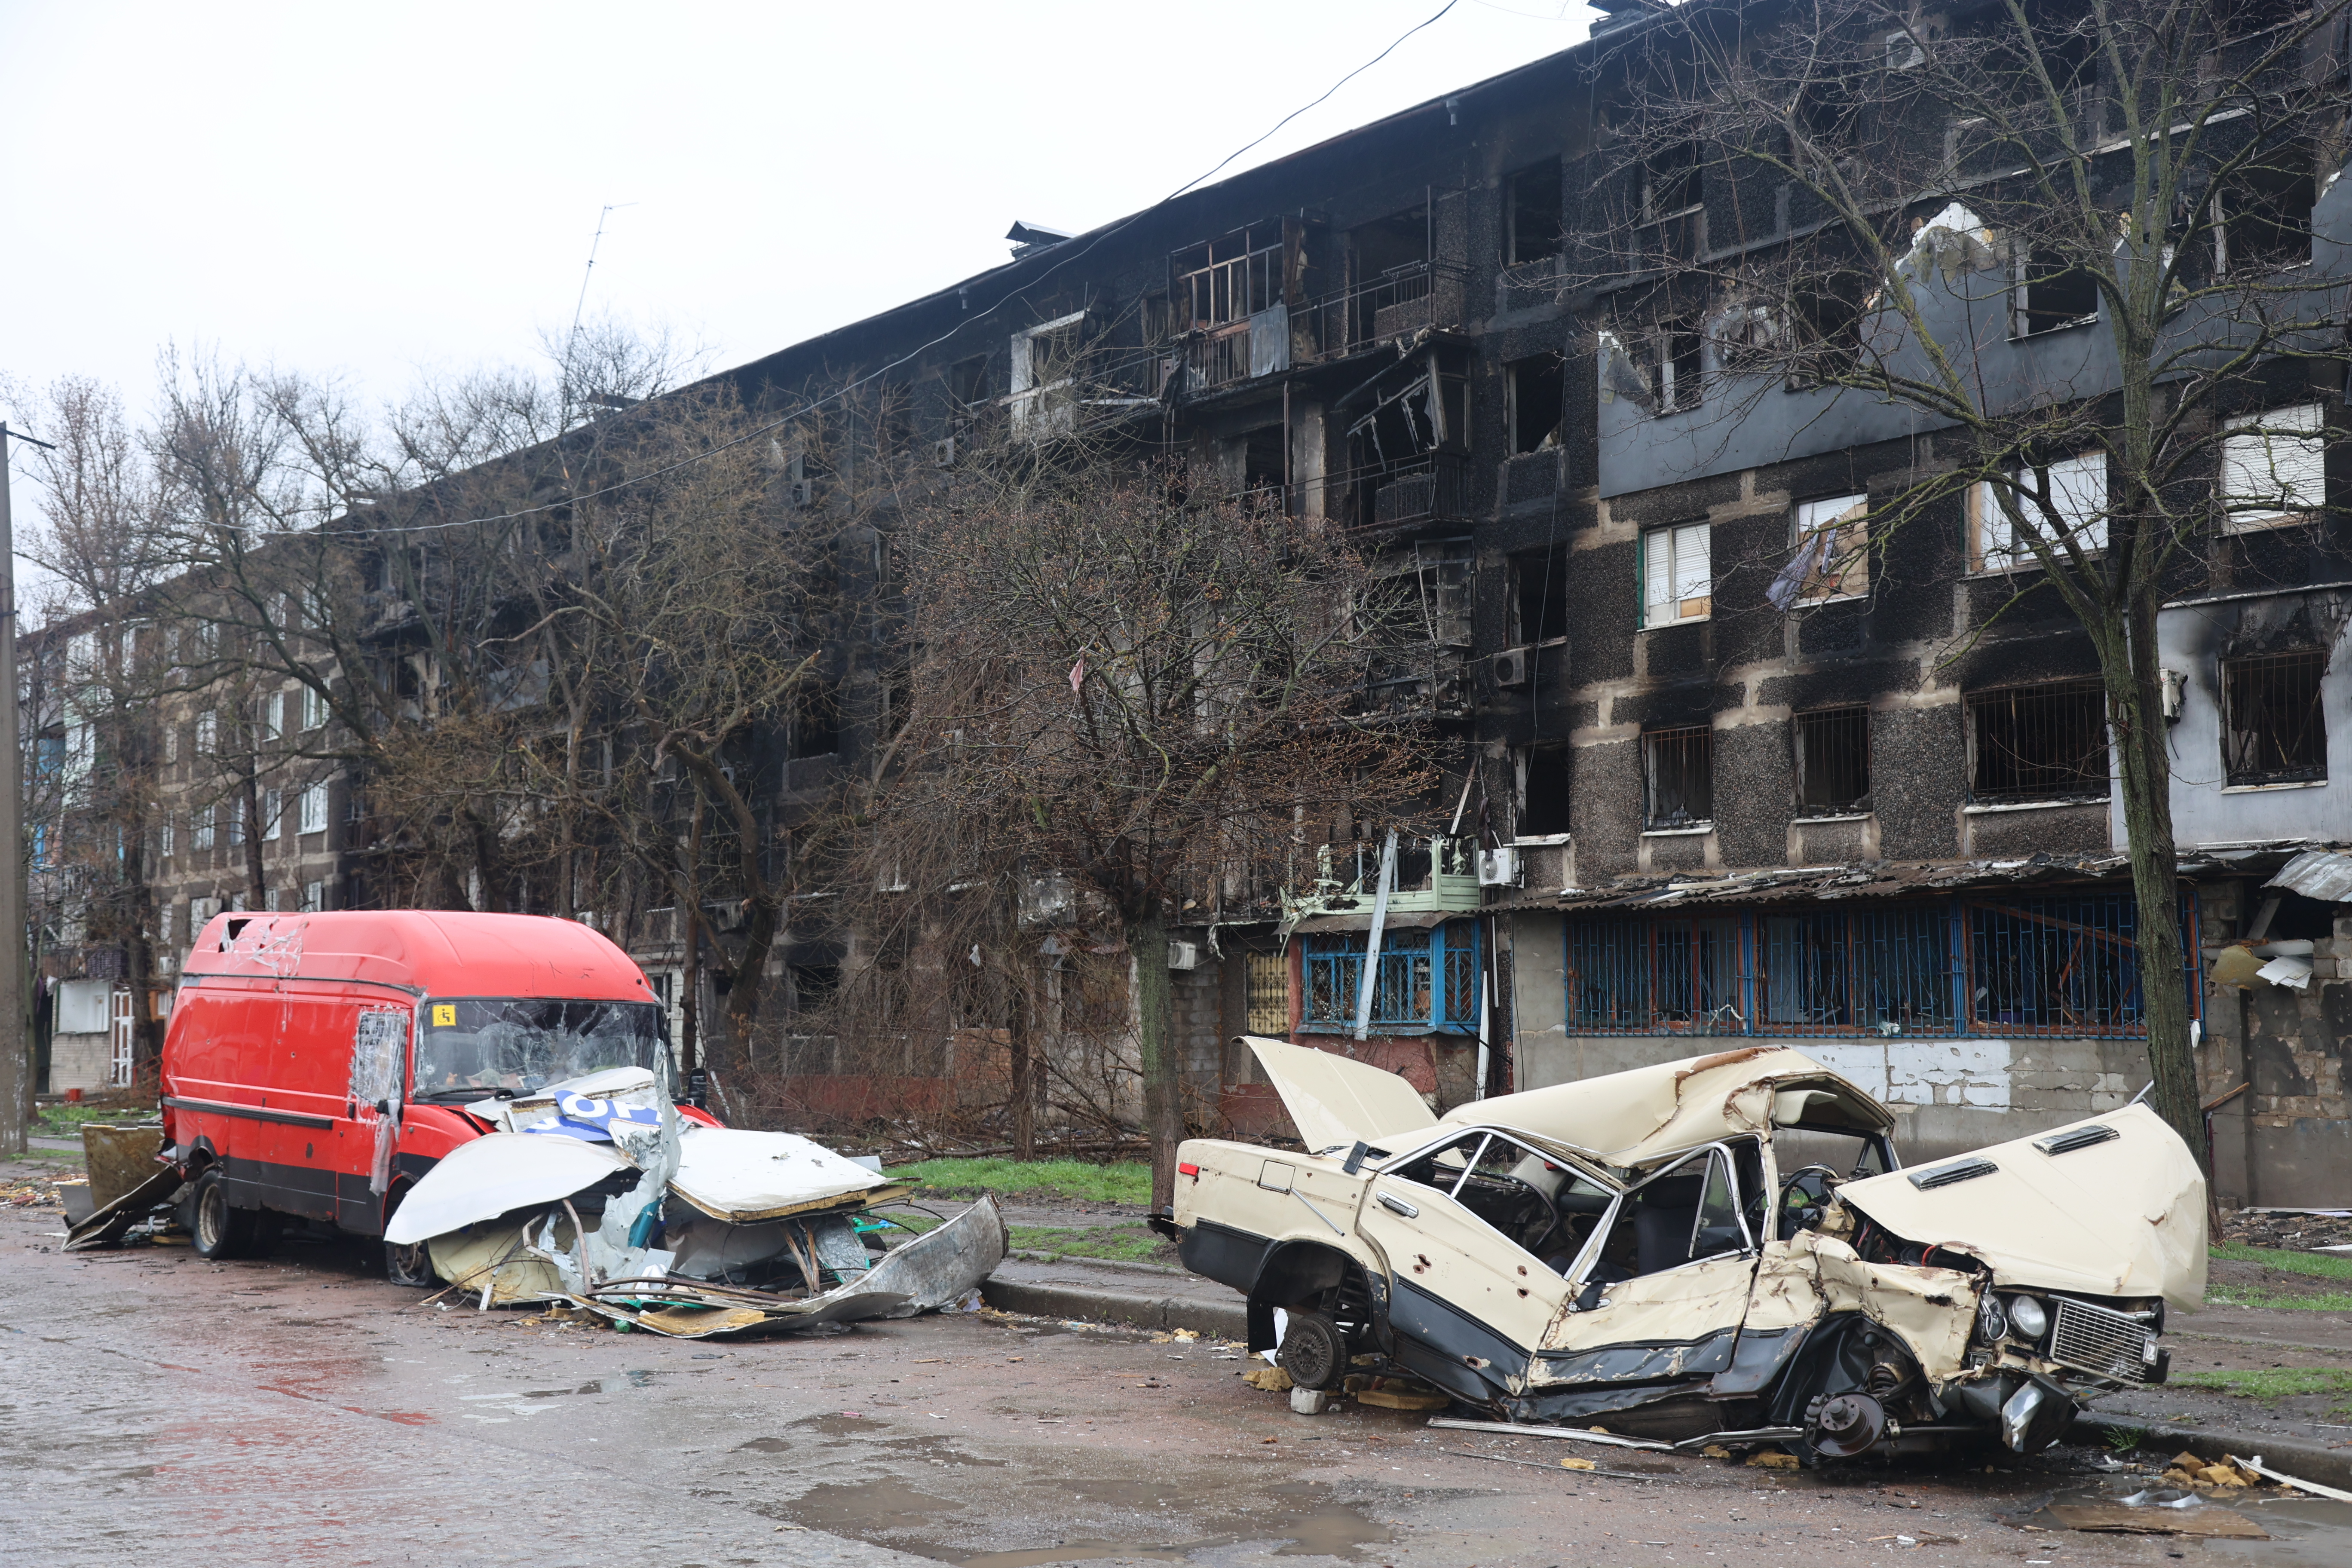 Mariupol civilians being ‘starved to death,’ says UN food chief